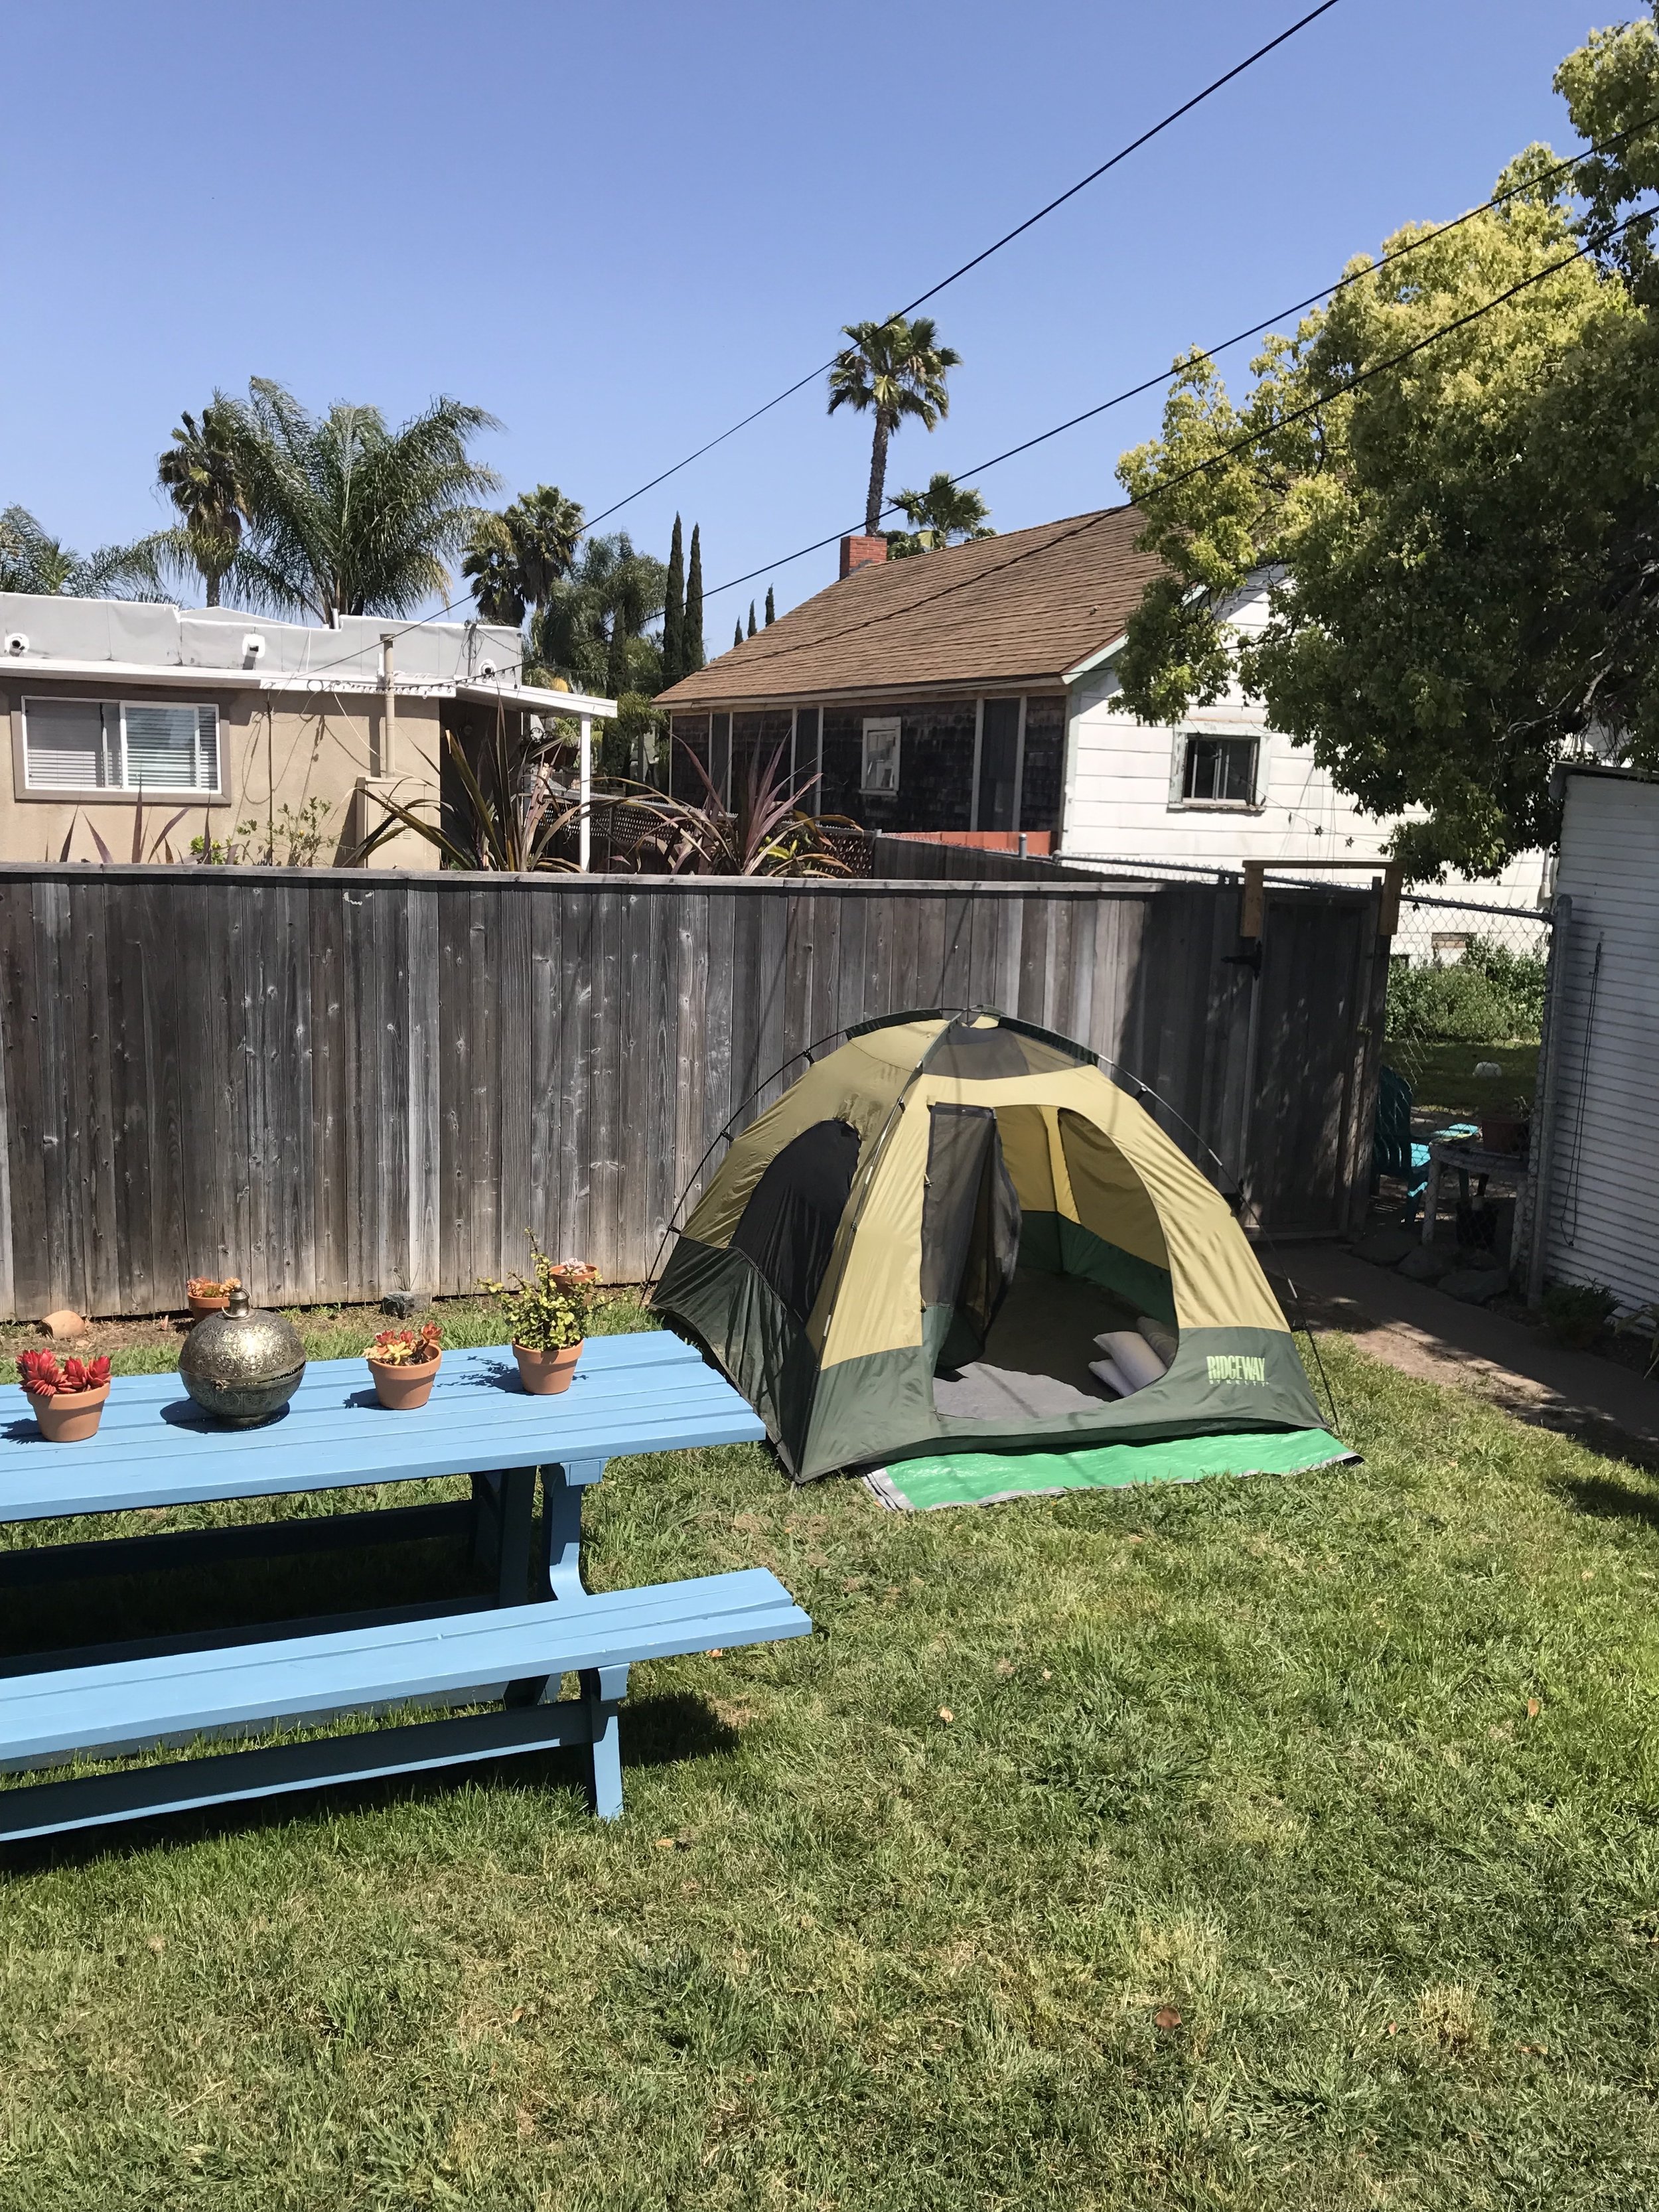 Camping in my old backyard (2017)